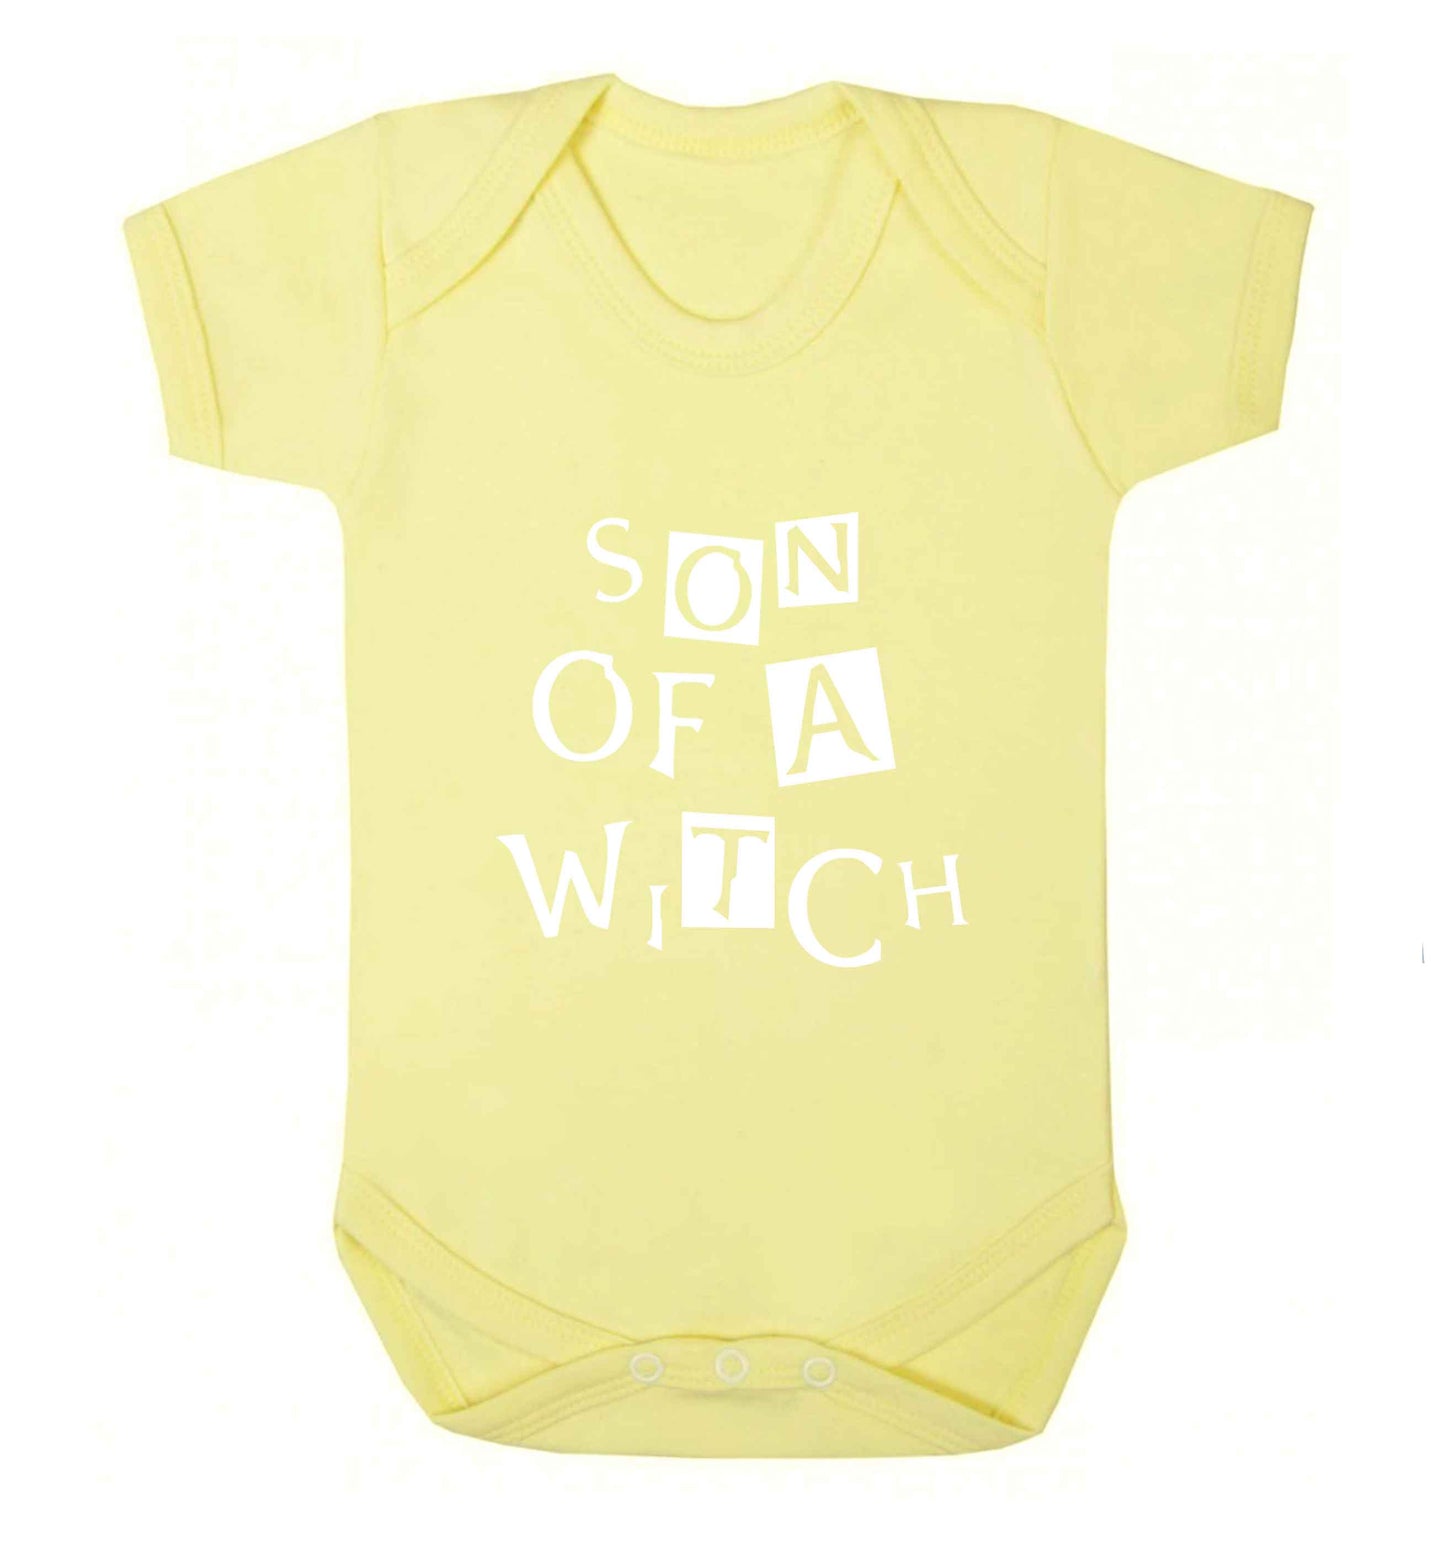 Son of a witch baby vest pale yellow 18-24 months